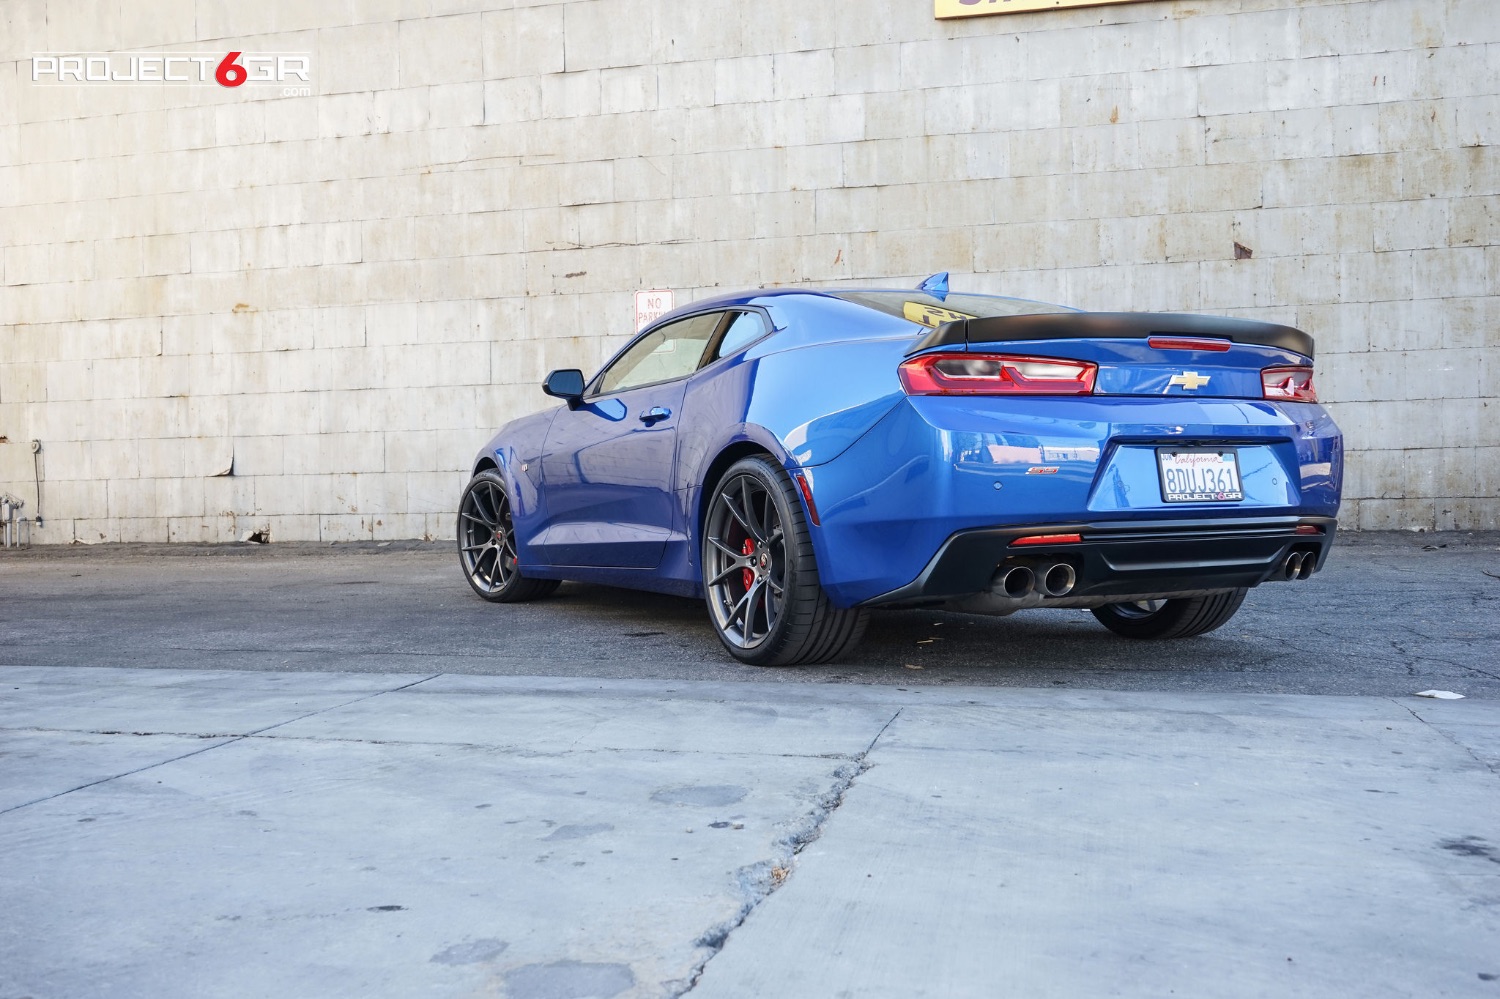 chevrolet-camaro-2-ss-zl1-blue-project-6gr-10-ten-full-forged-gloss-graphite-04